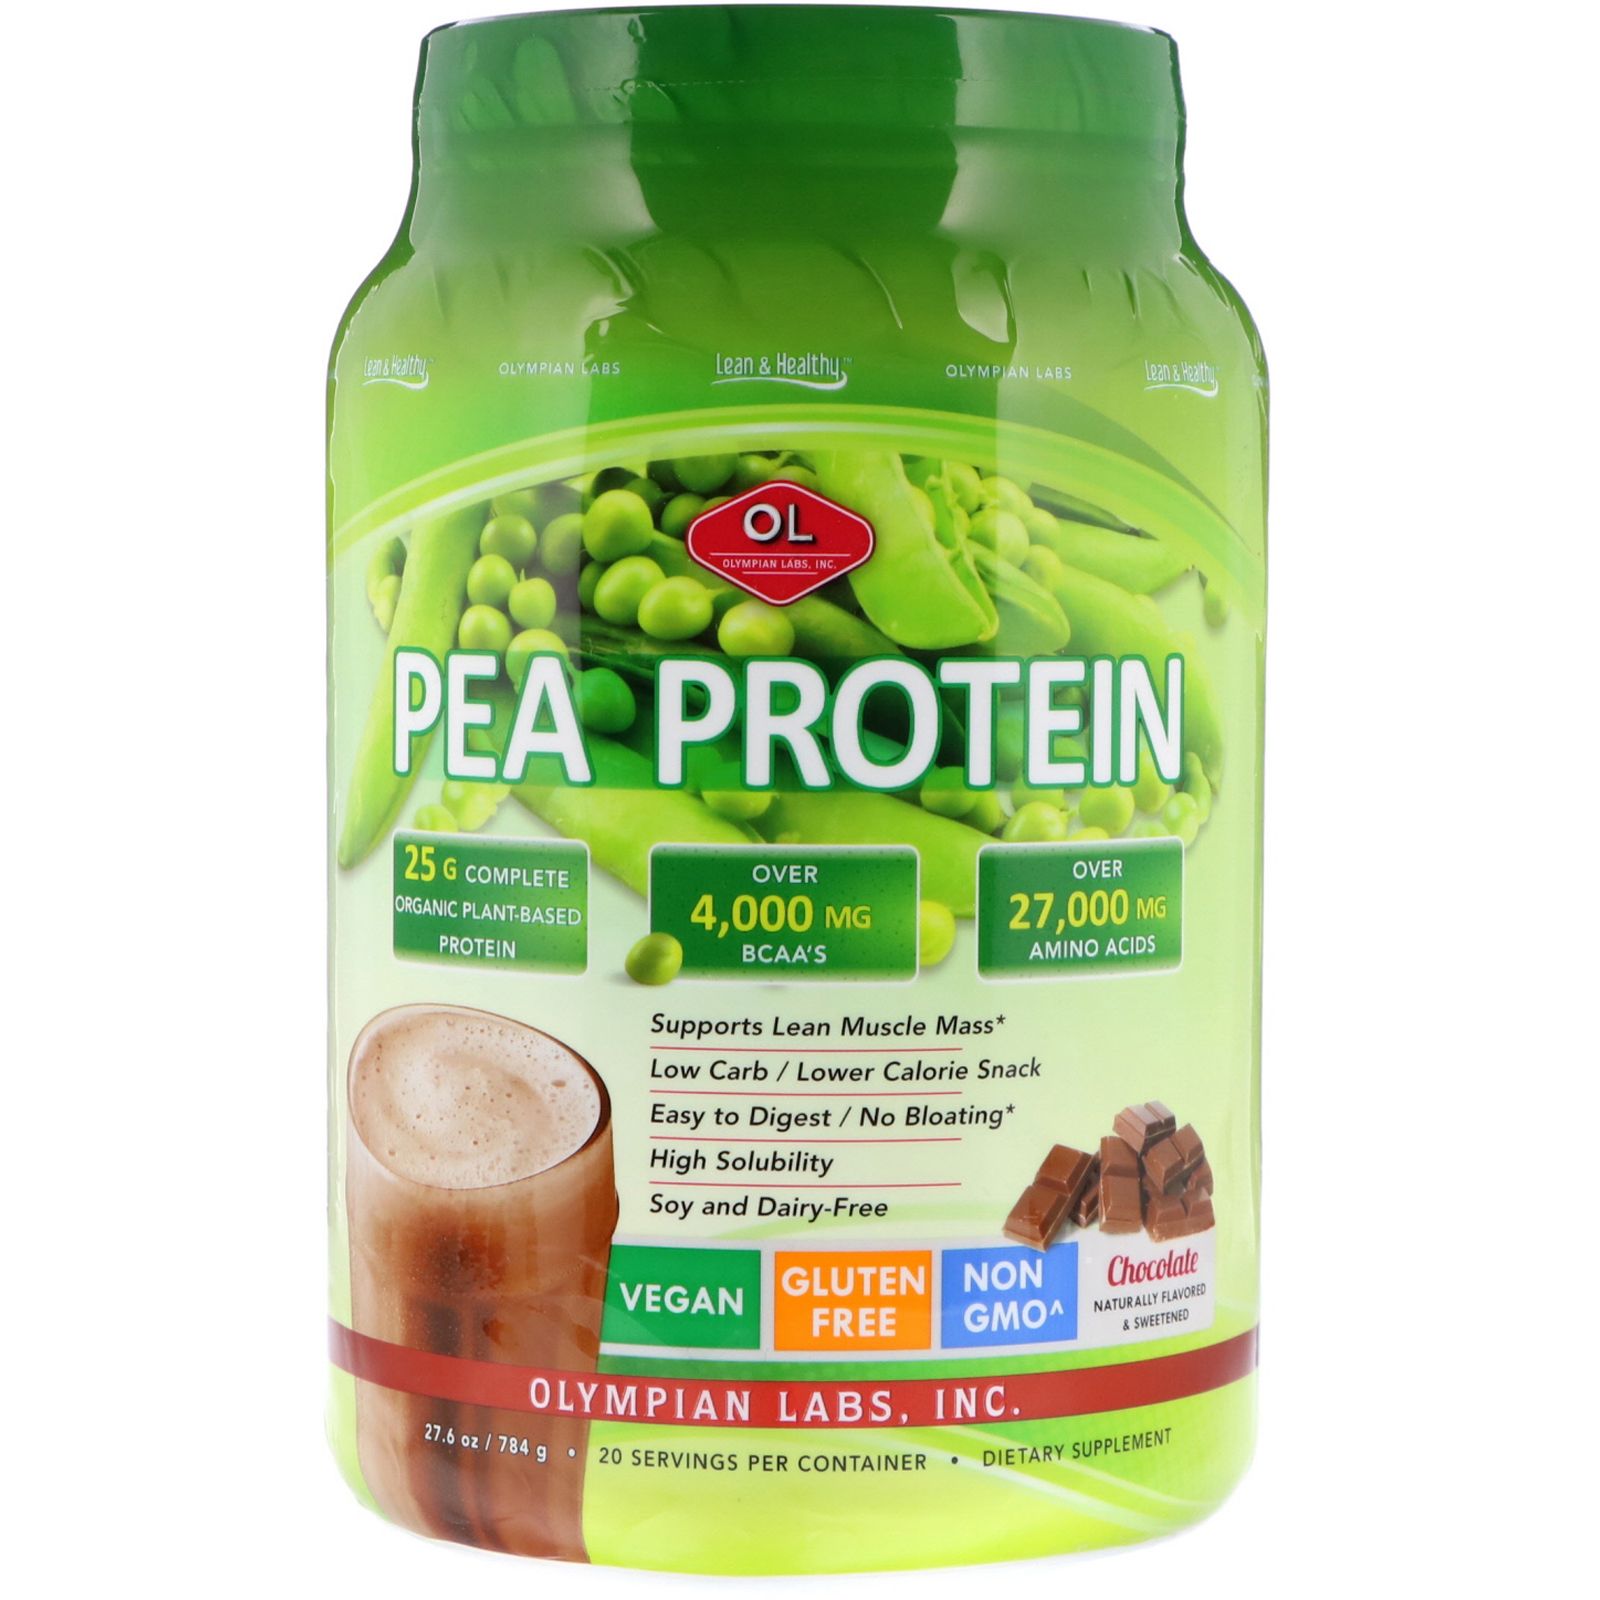 Olympian Labs Lean & Healthy Pea Protein Chocolate 27.6 oz (784 g) olympian labs zinc 30 mg 100 capsules